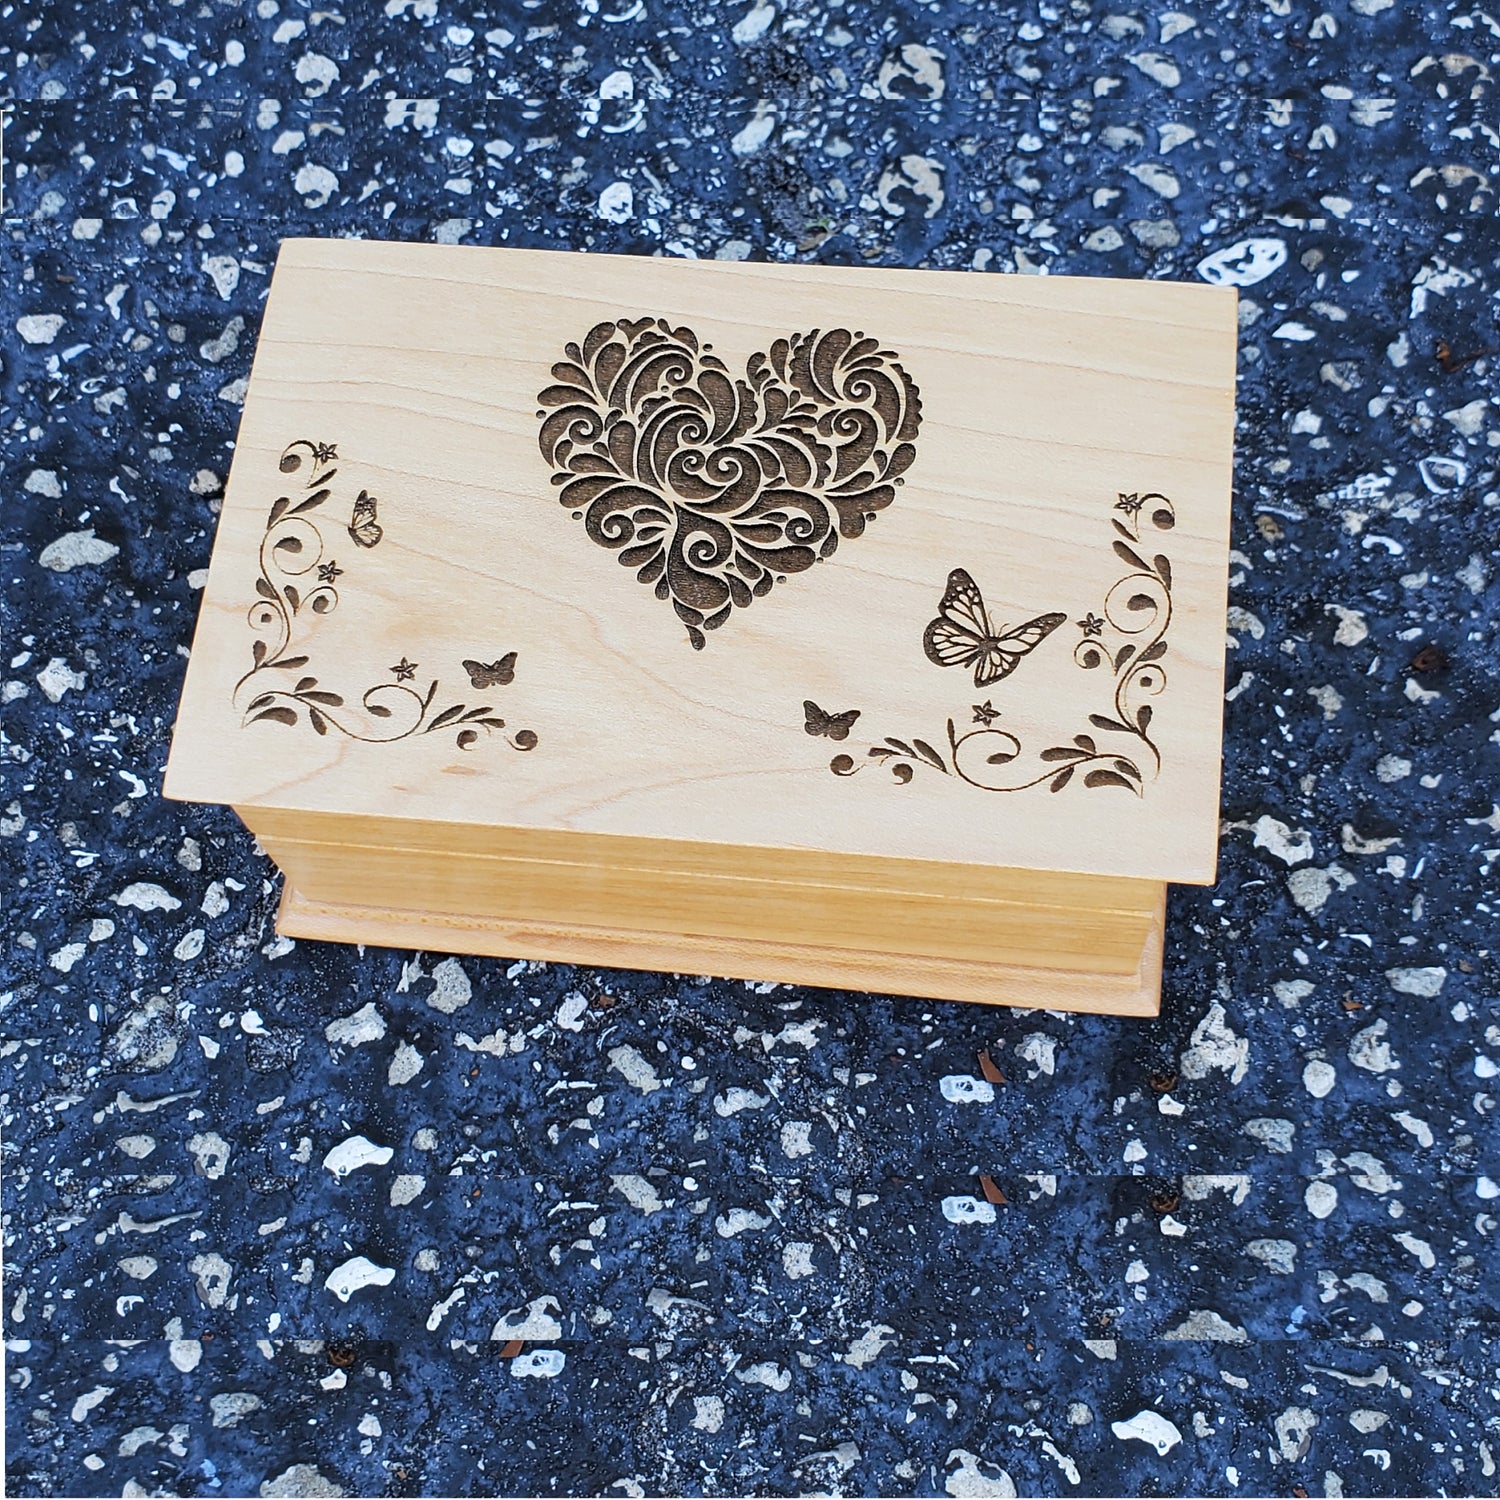 heart and butterflies engraved wooden jewelry box with music player inside, choose song, color add personalized message, music box shop. music box attic, simplycoolgifts, 